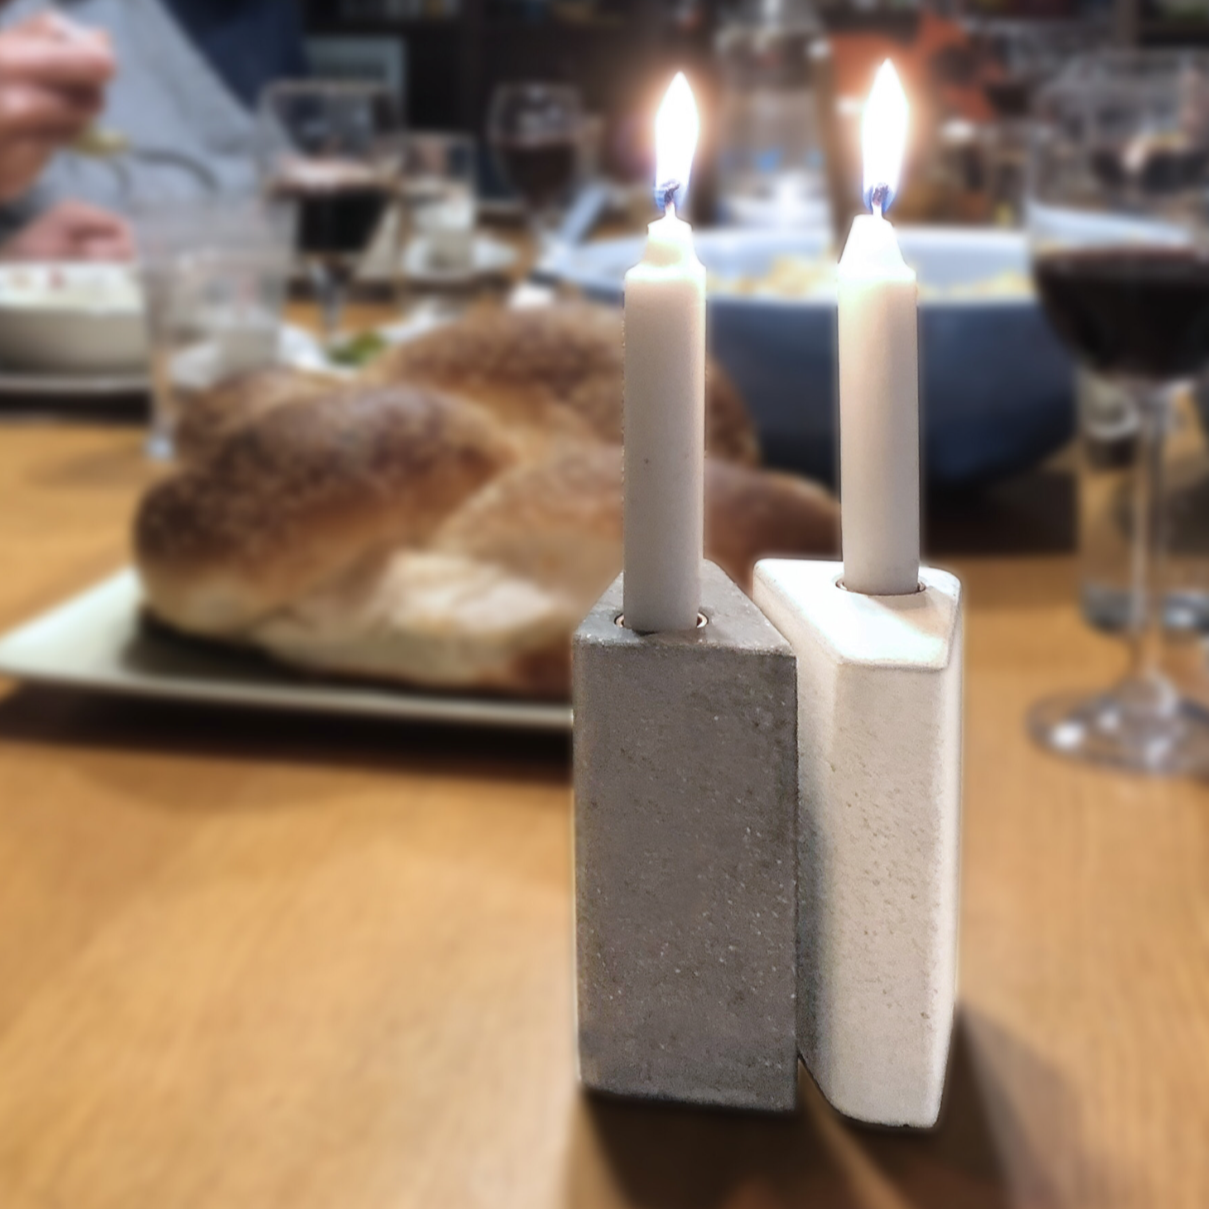 Concrete candlesticks from Israel